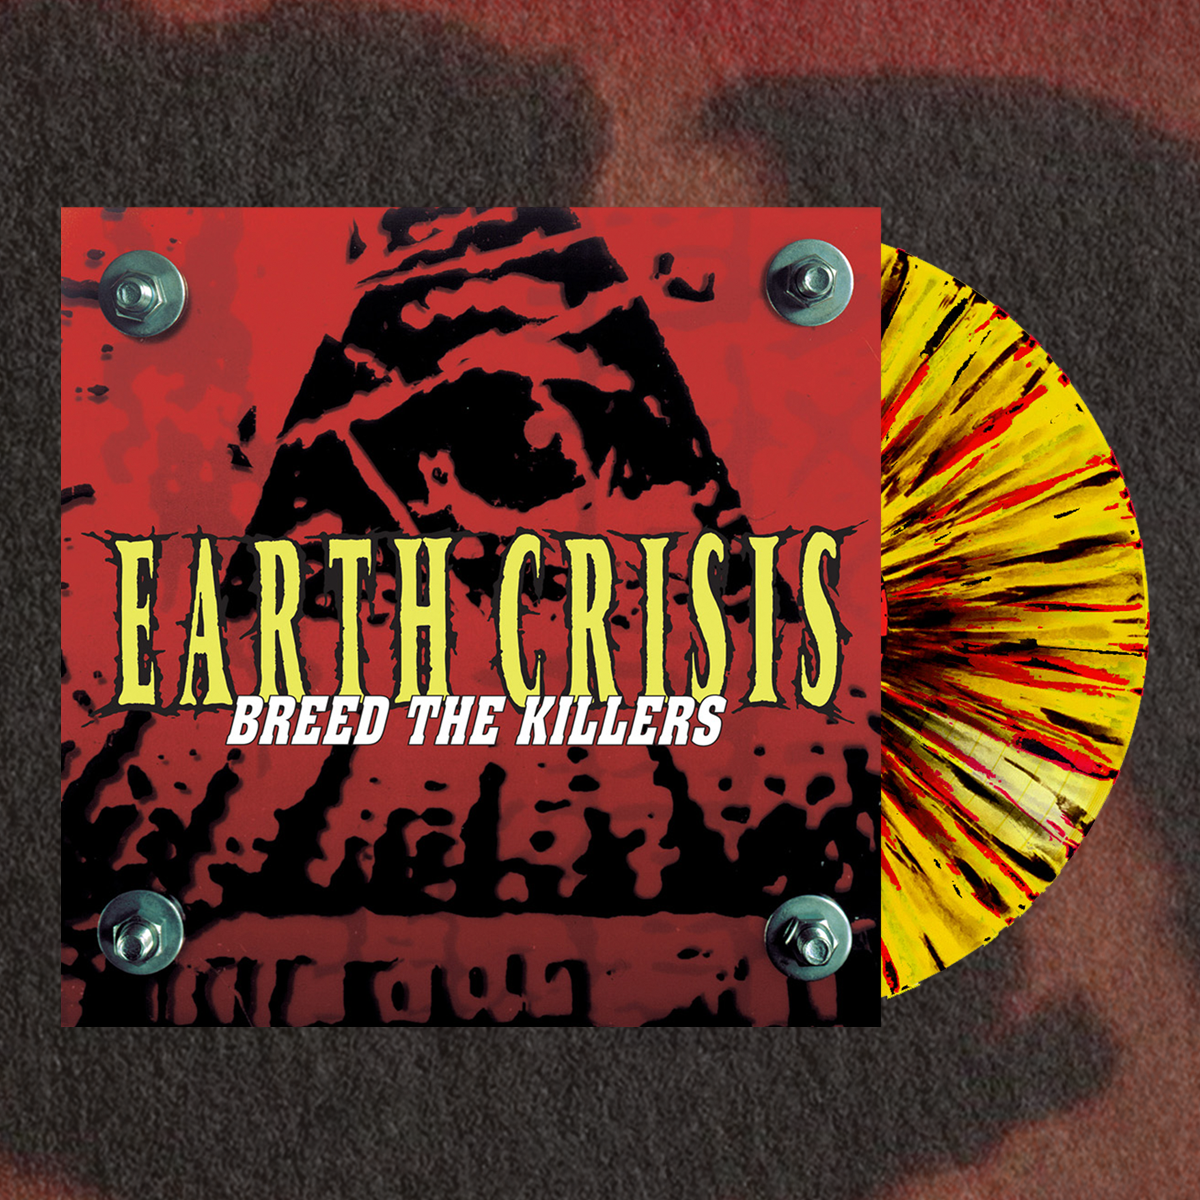 EARTH CRISIS "BREED THE KILLERS" VINYL RECORD